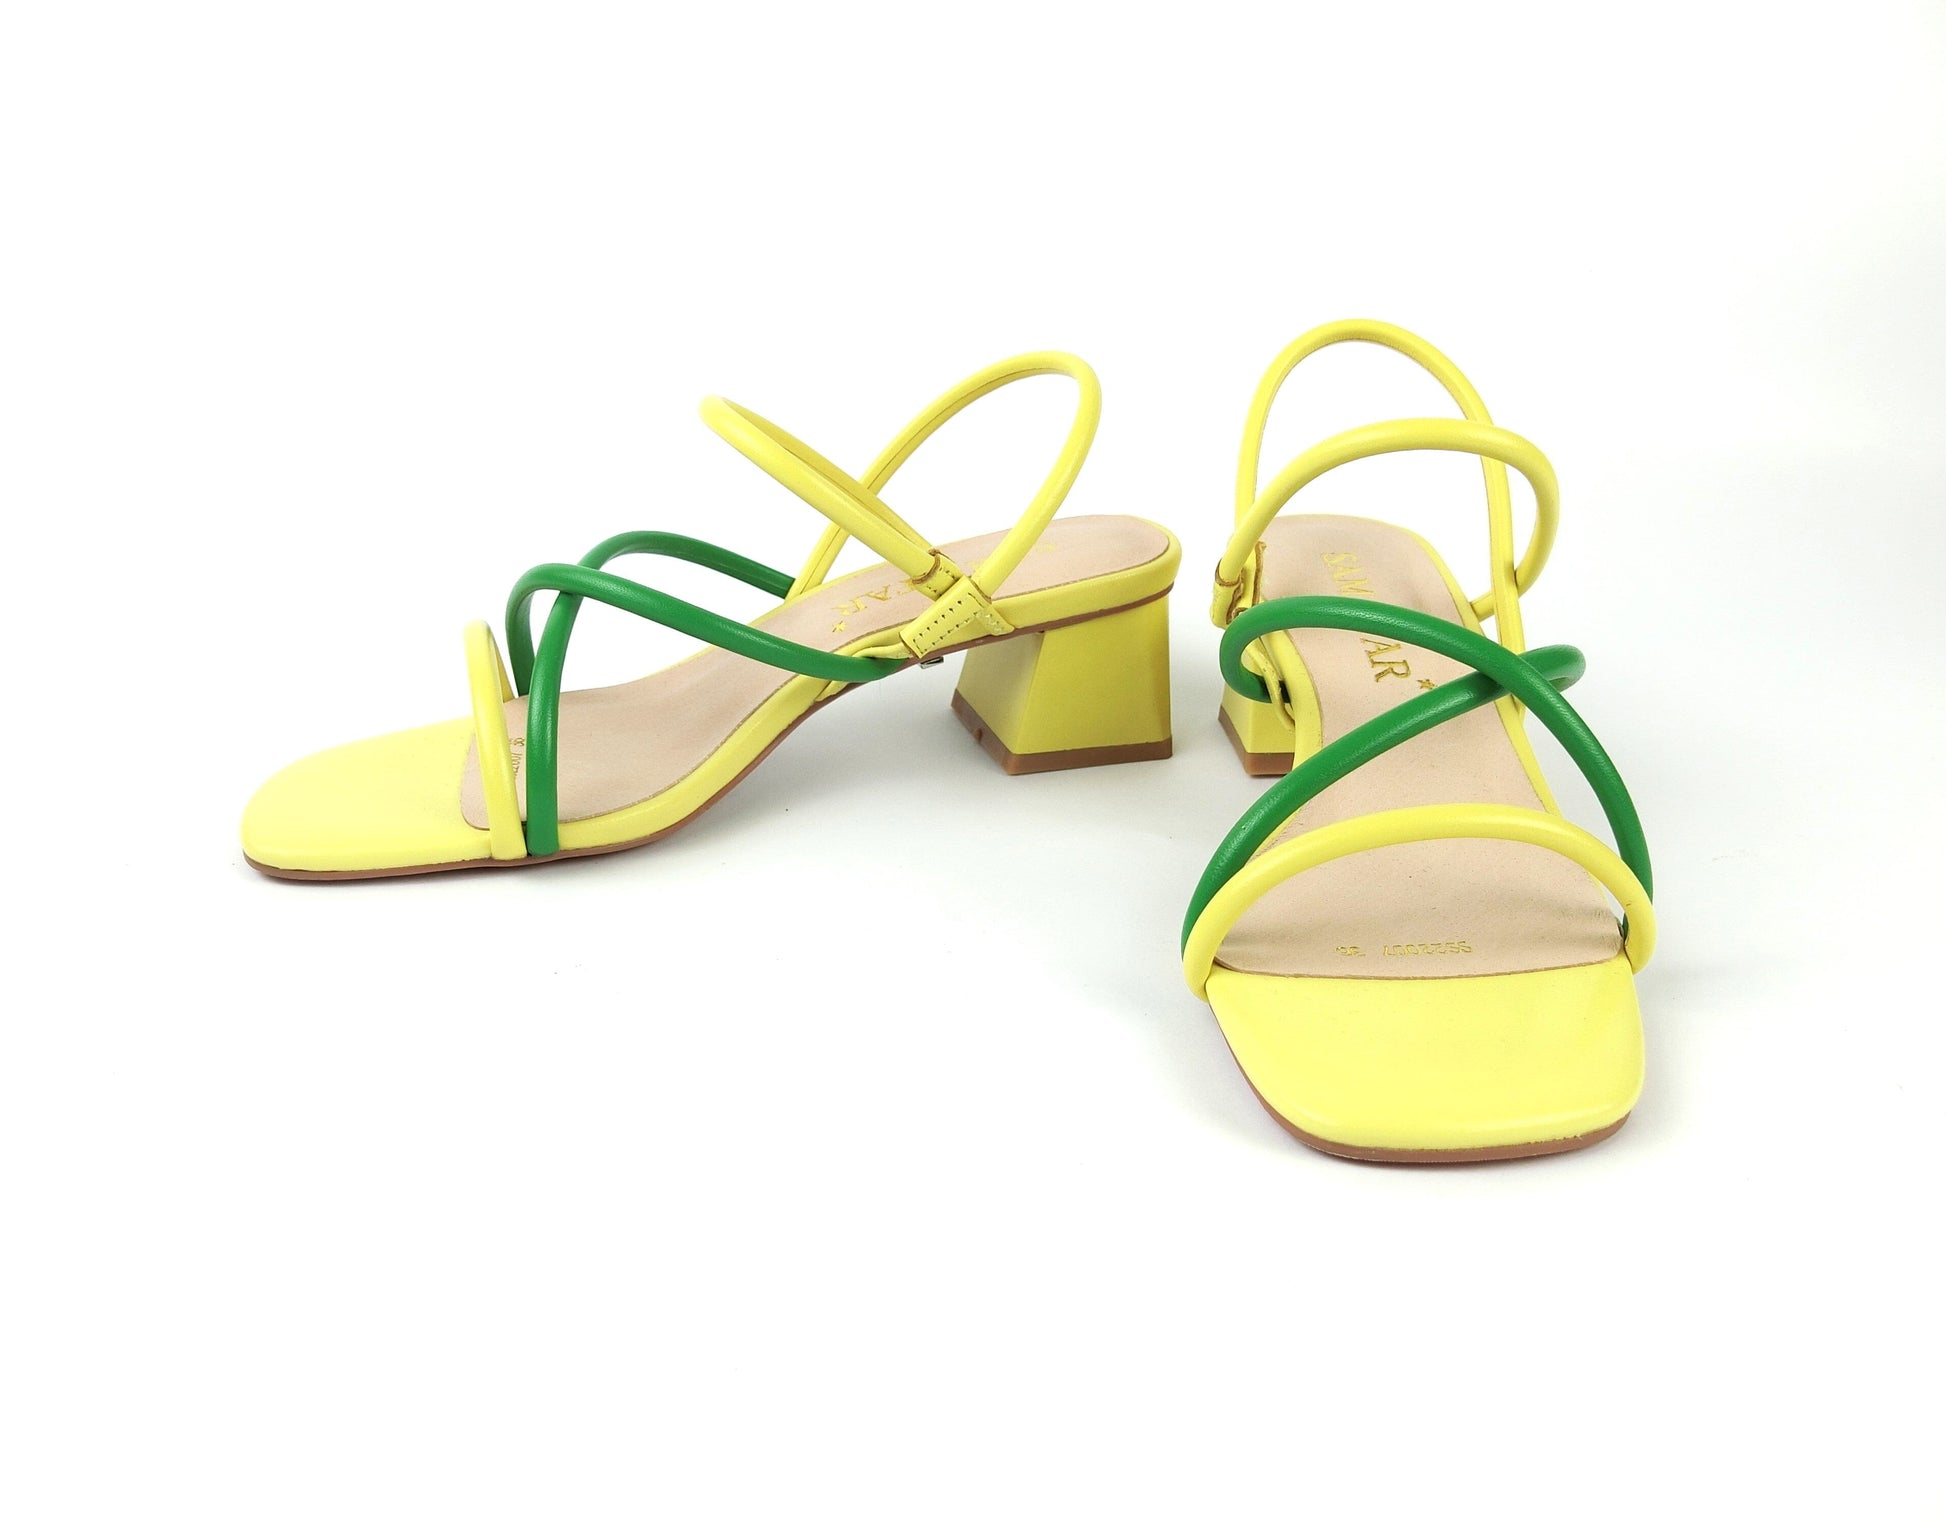 SS22008 Genuine leather strappy block heel sandals in Green and Yellow sandals Sam Star Shoes 